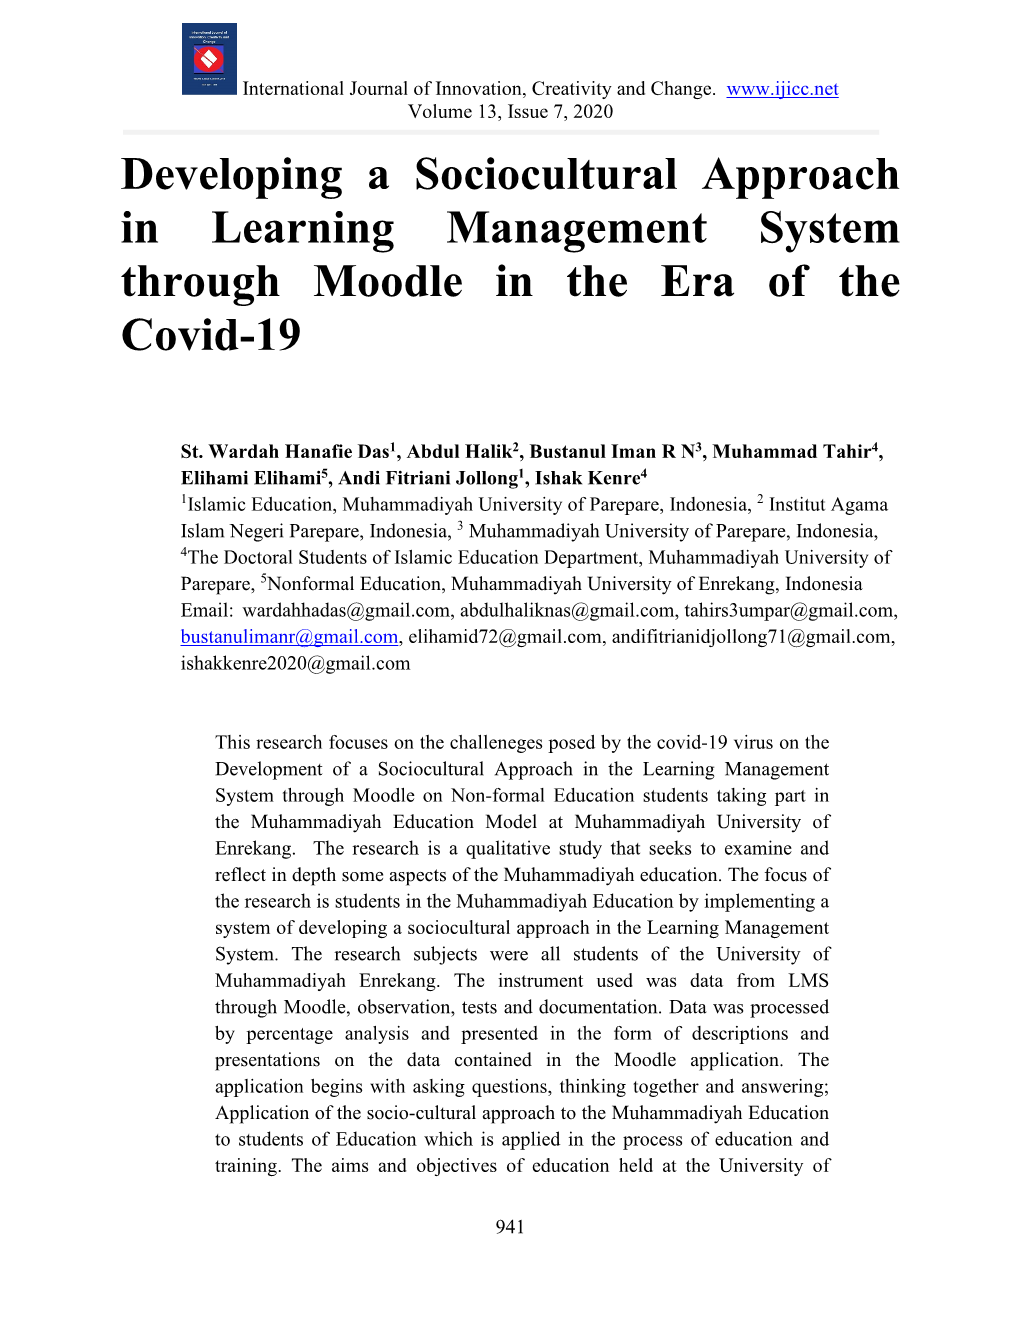 Developing a Sociocultural Approach in Learning Management System Through Moodle in the Era of the Covid-19